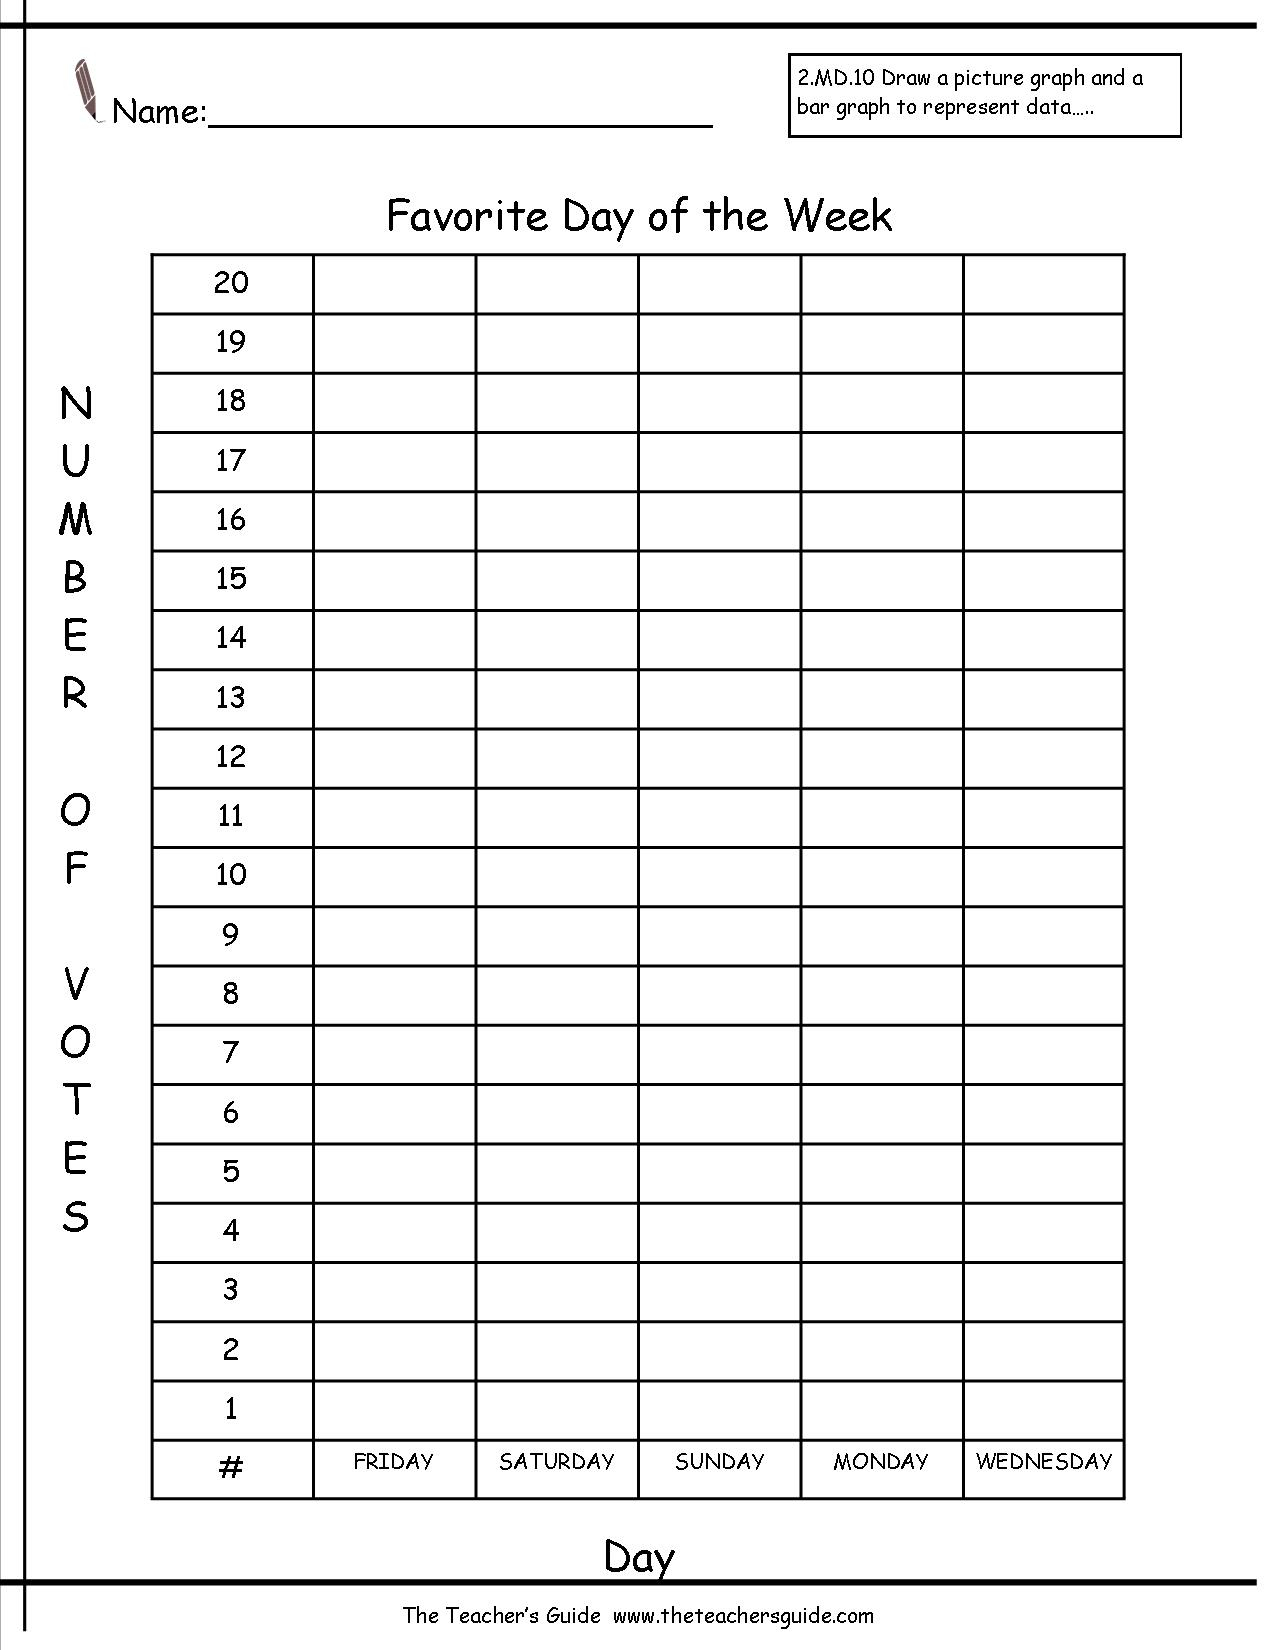 Reading And Creating Bar Graphs Worksheets From The Teacher&amp;#039;s Guide | Blank Bar Graph Printable Worksheets